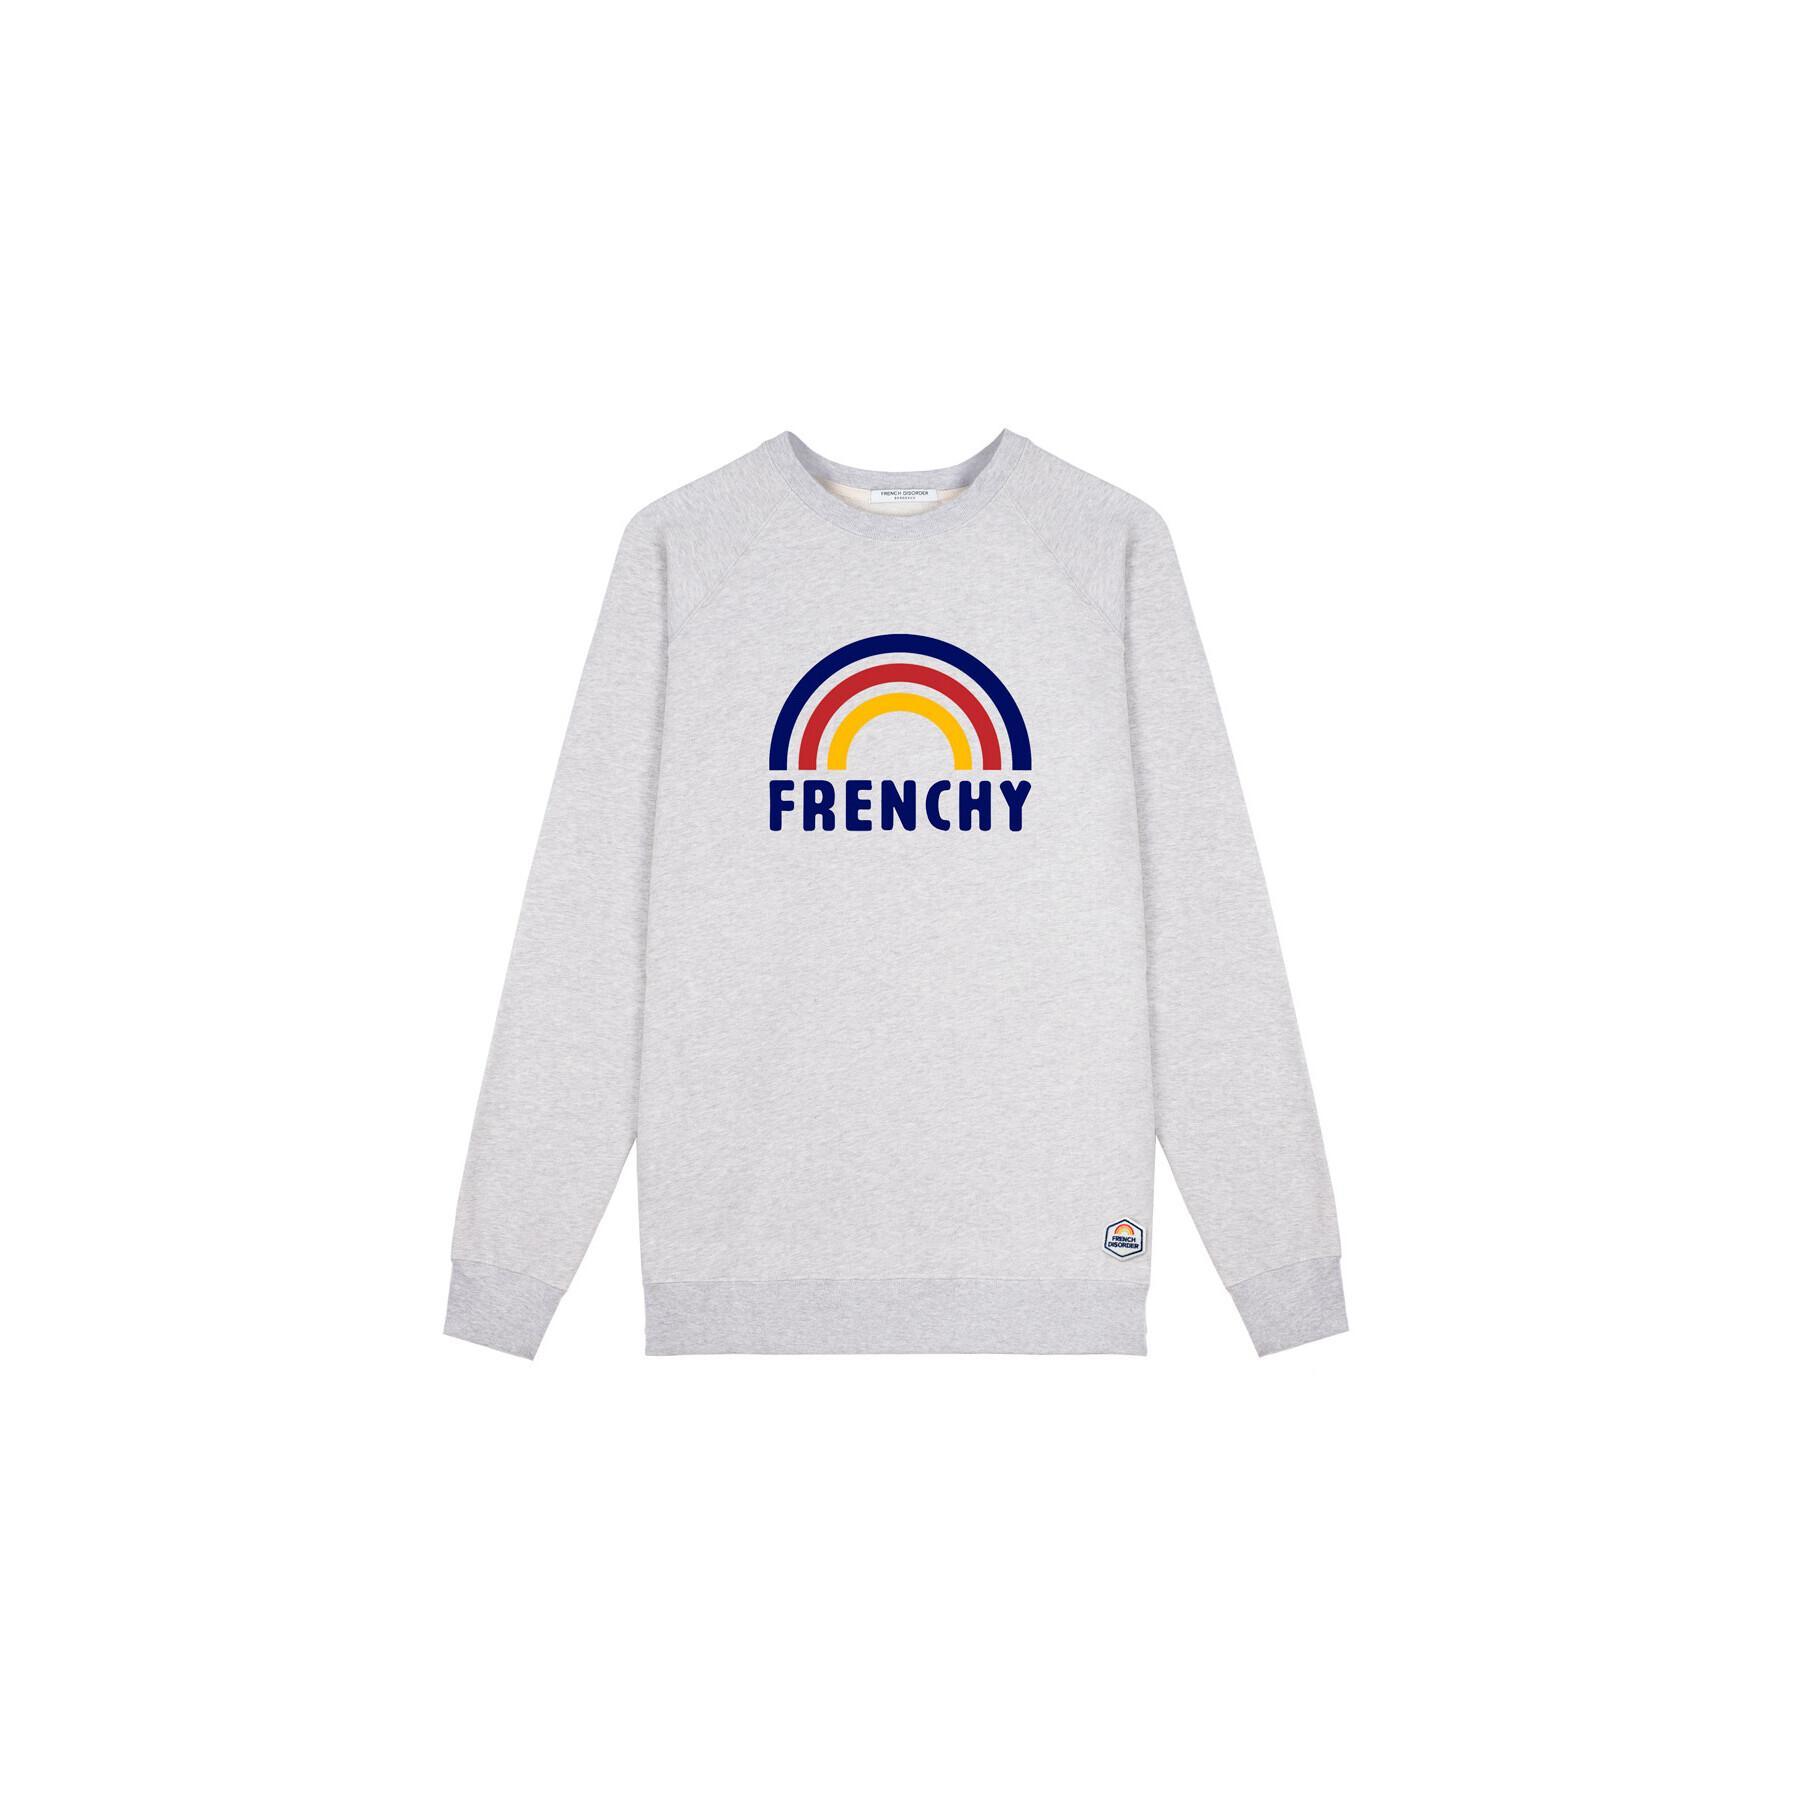 Sweatshirt French Disorder Clyde Frenchy